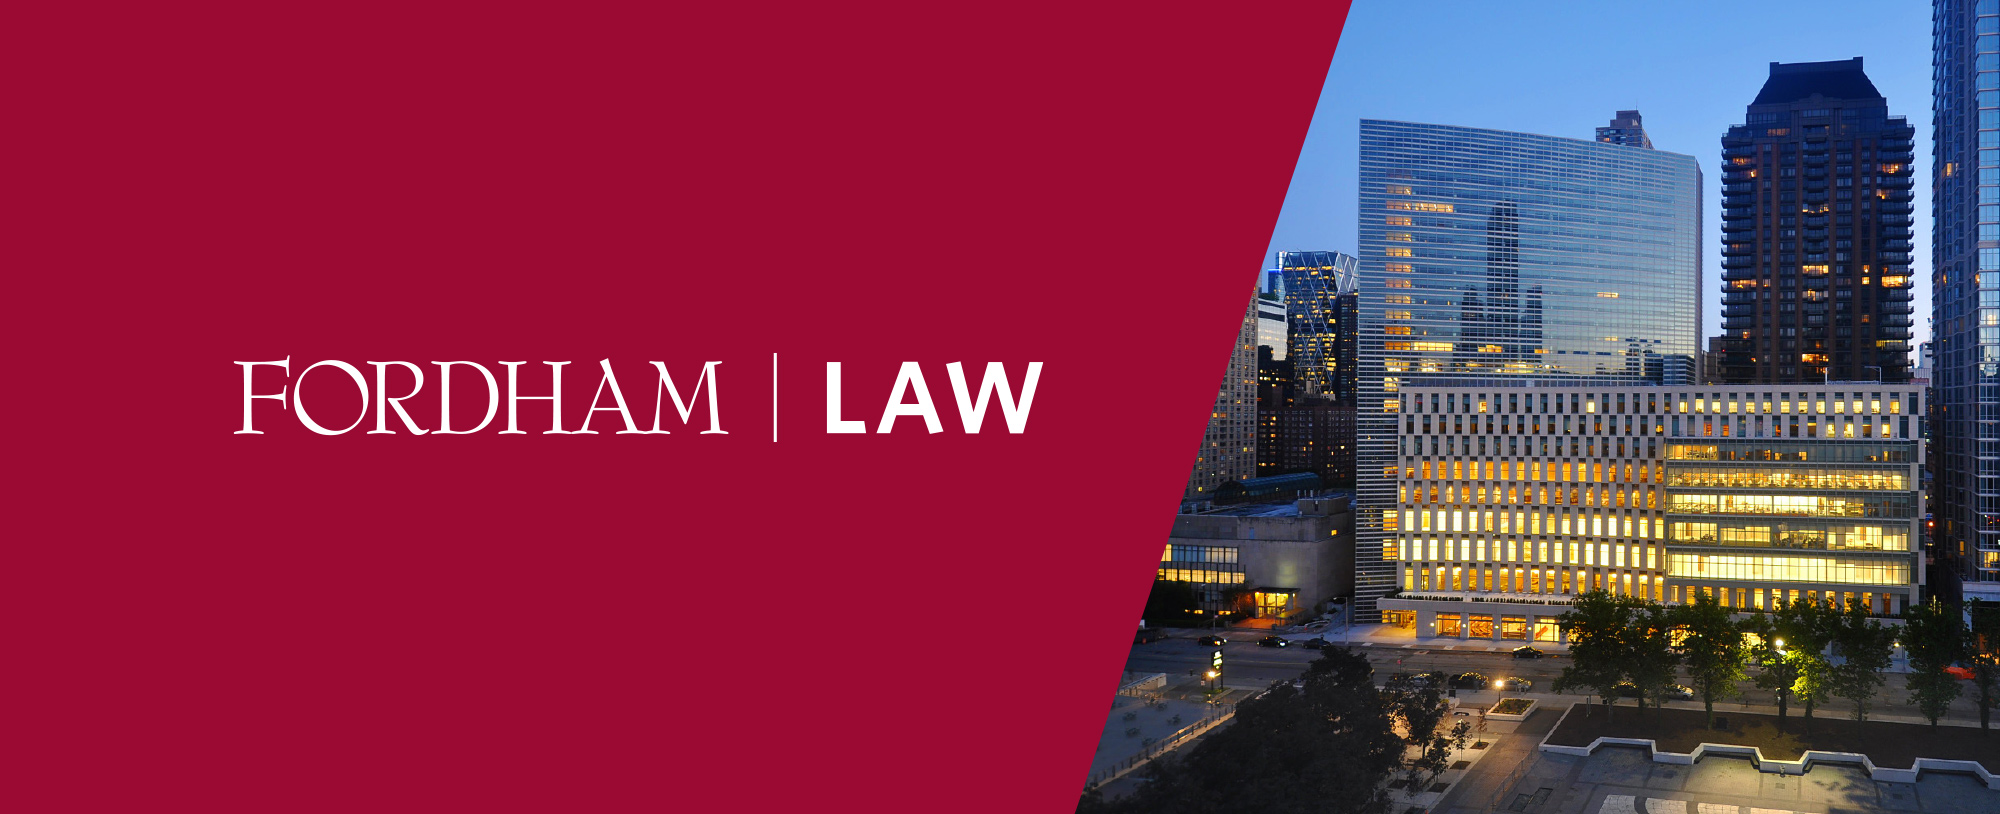 Fordham | Law typography with skyscrapers